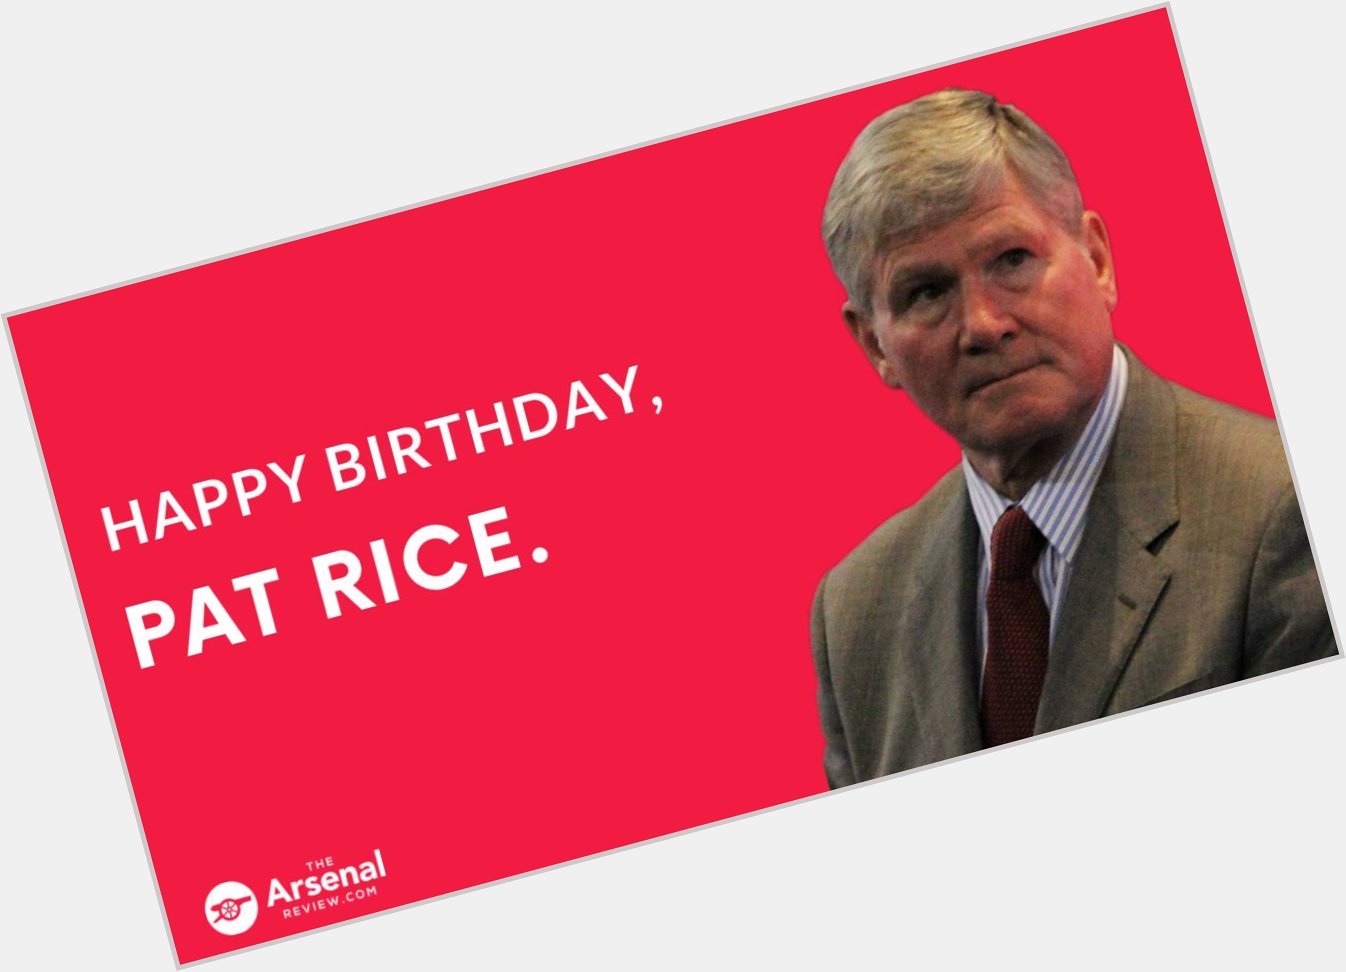 Pat Rice spent 13 years at Arsenal and played over 500 matches for the club Happy Birthday, Pat 